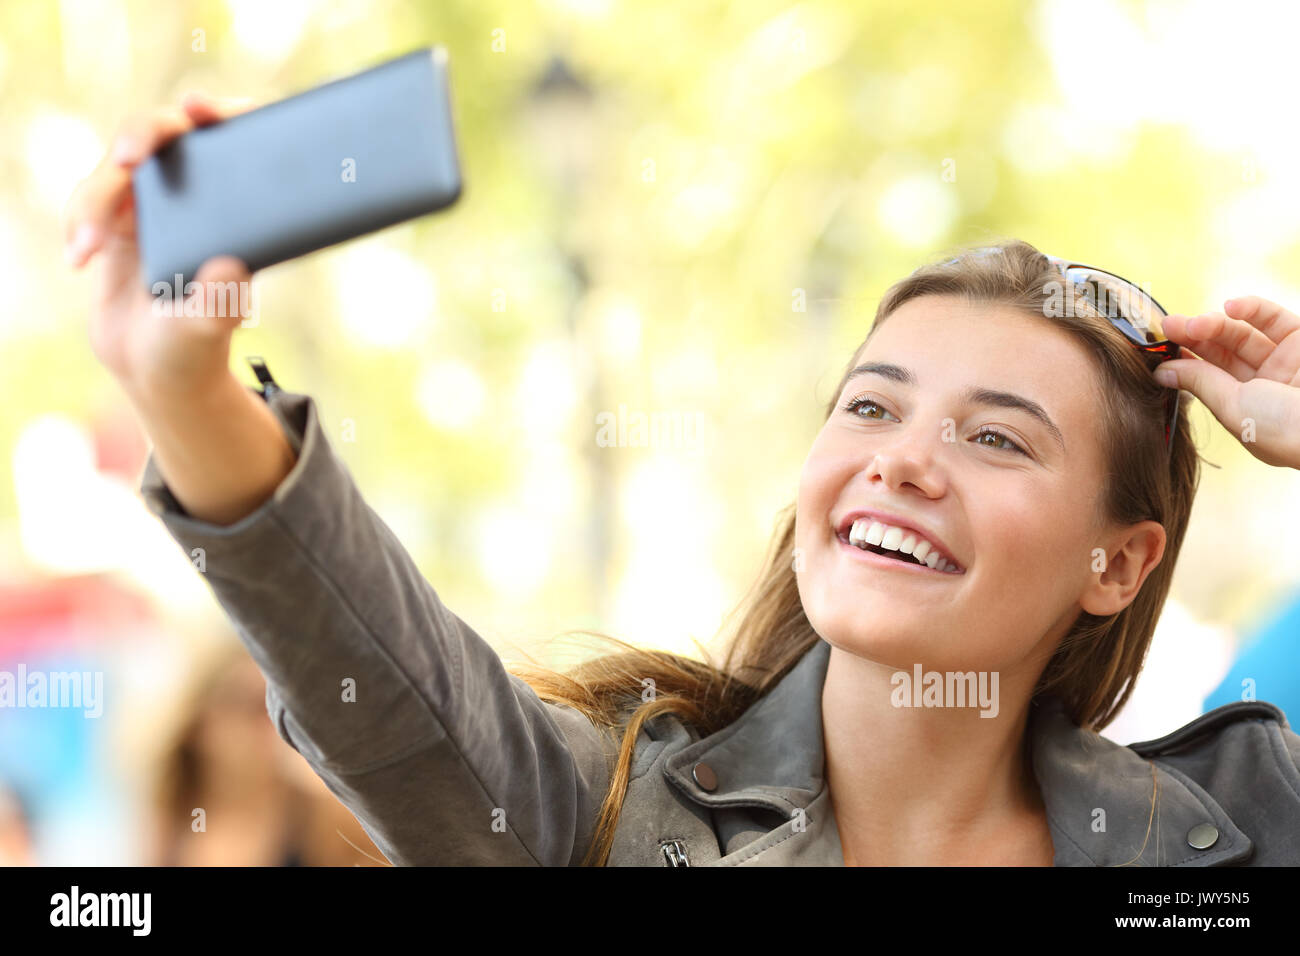 Fashion teen taking selfies with a smart phone on the street Stock Photo